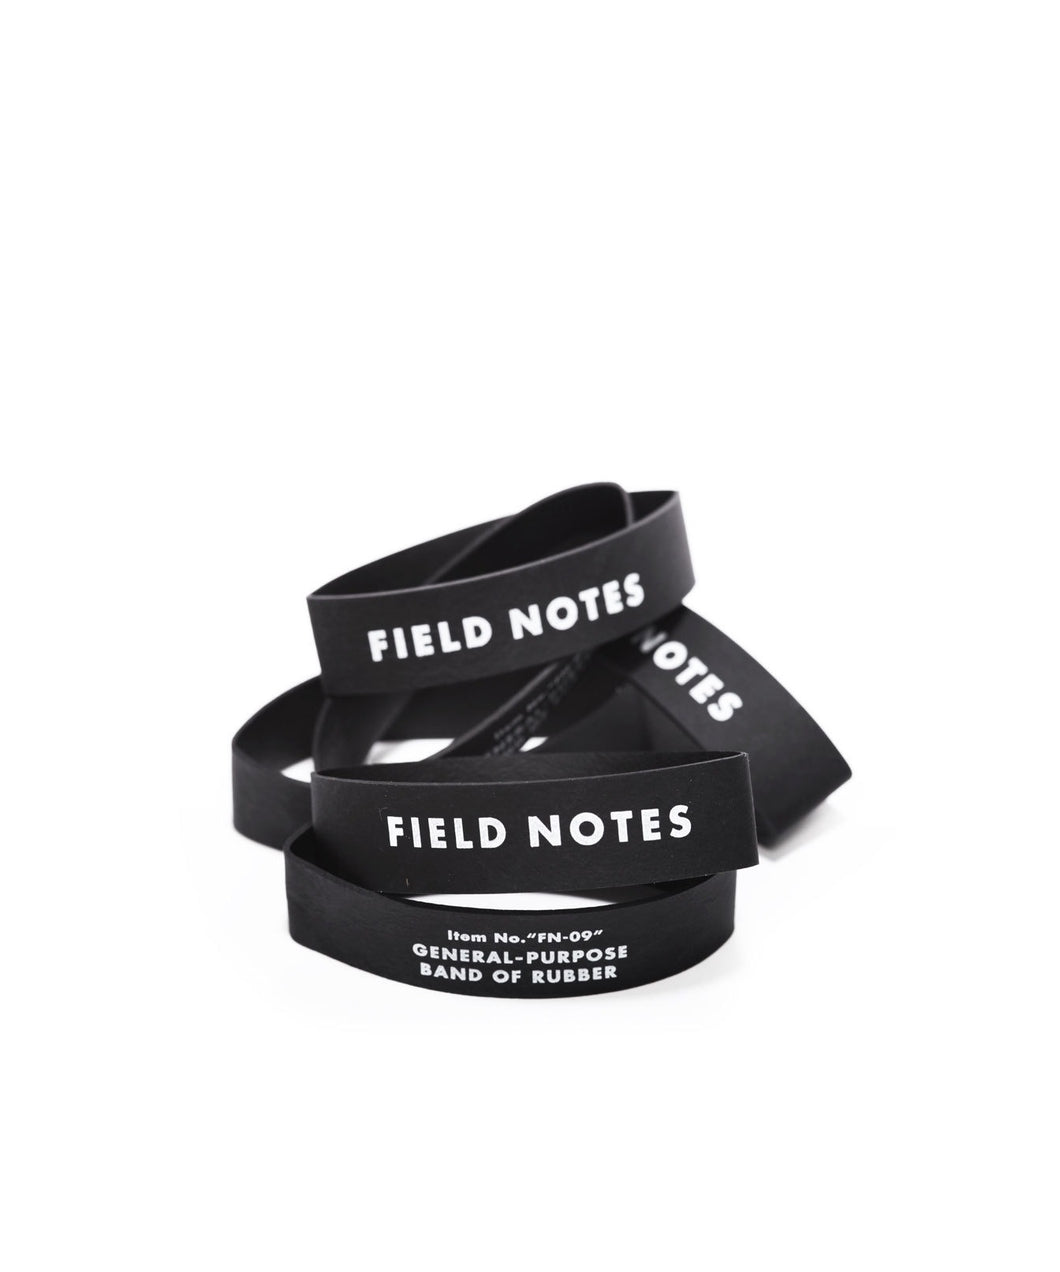 Field Notes - Band of Rubber 12-Pack